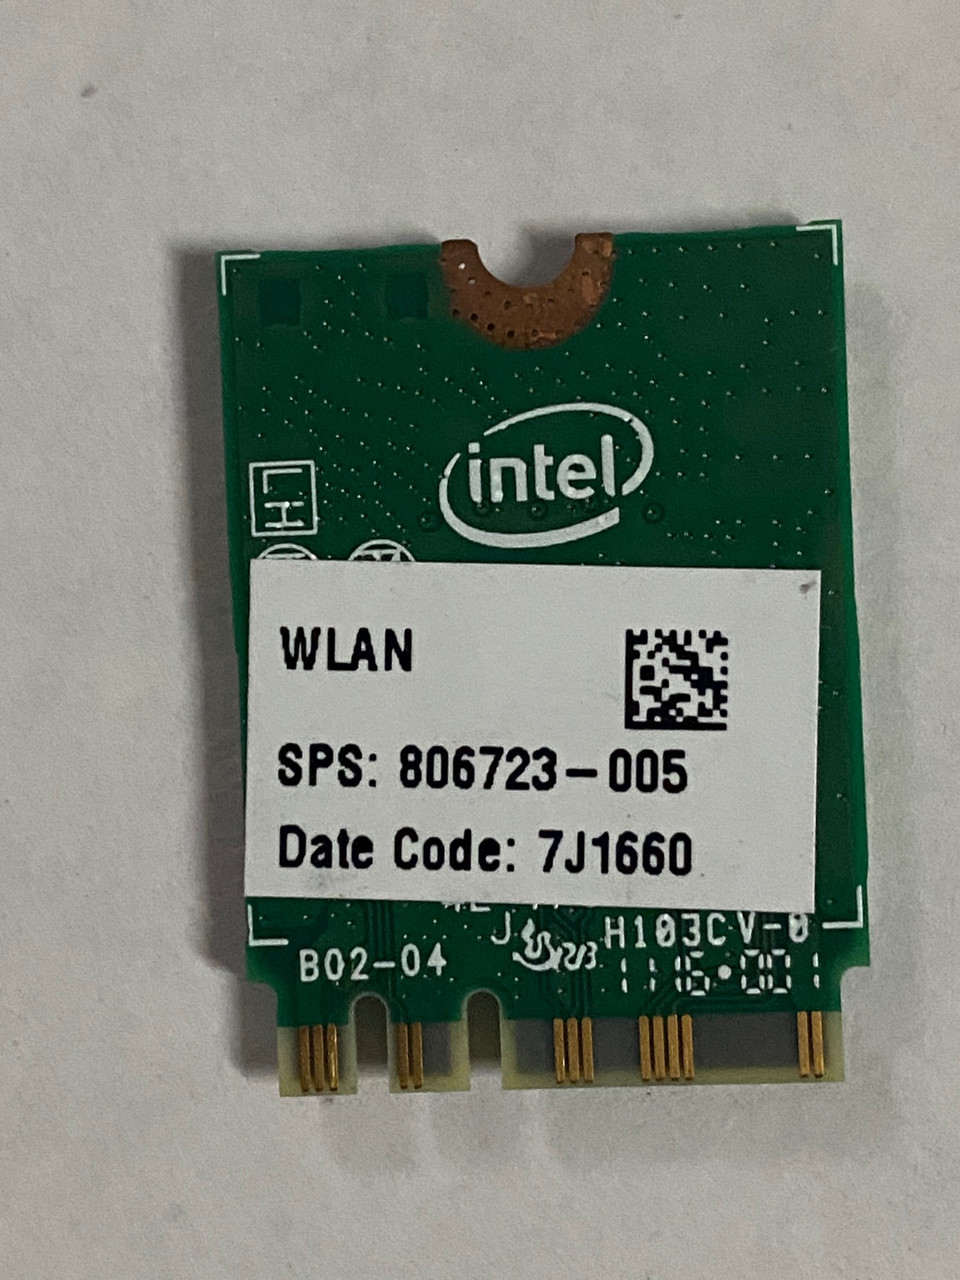 intel r dual band wireless ac 3165 showing as not connected